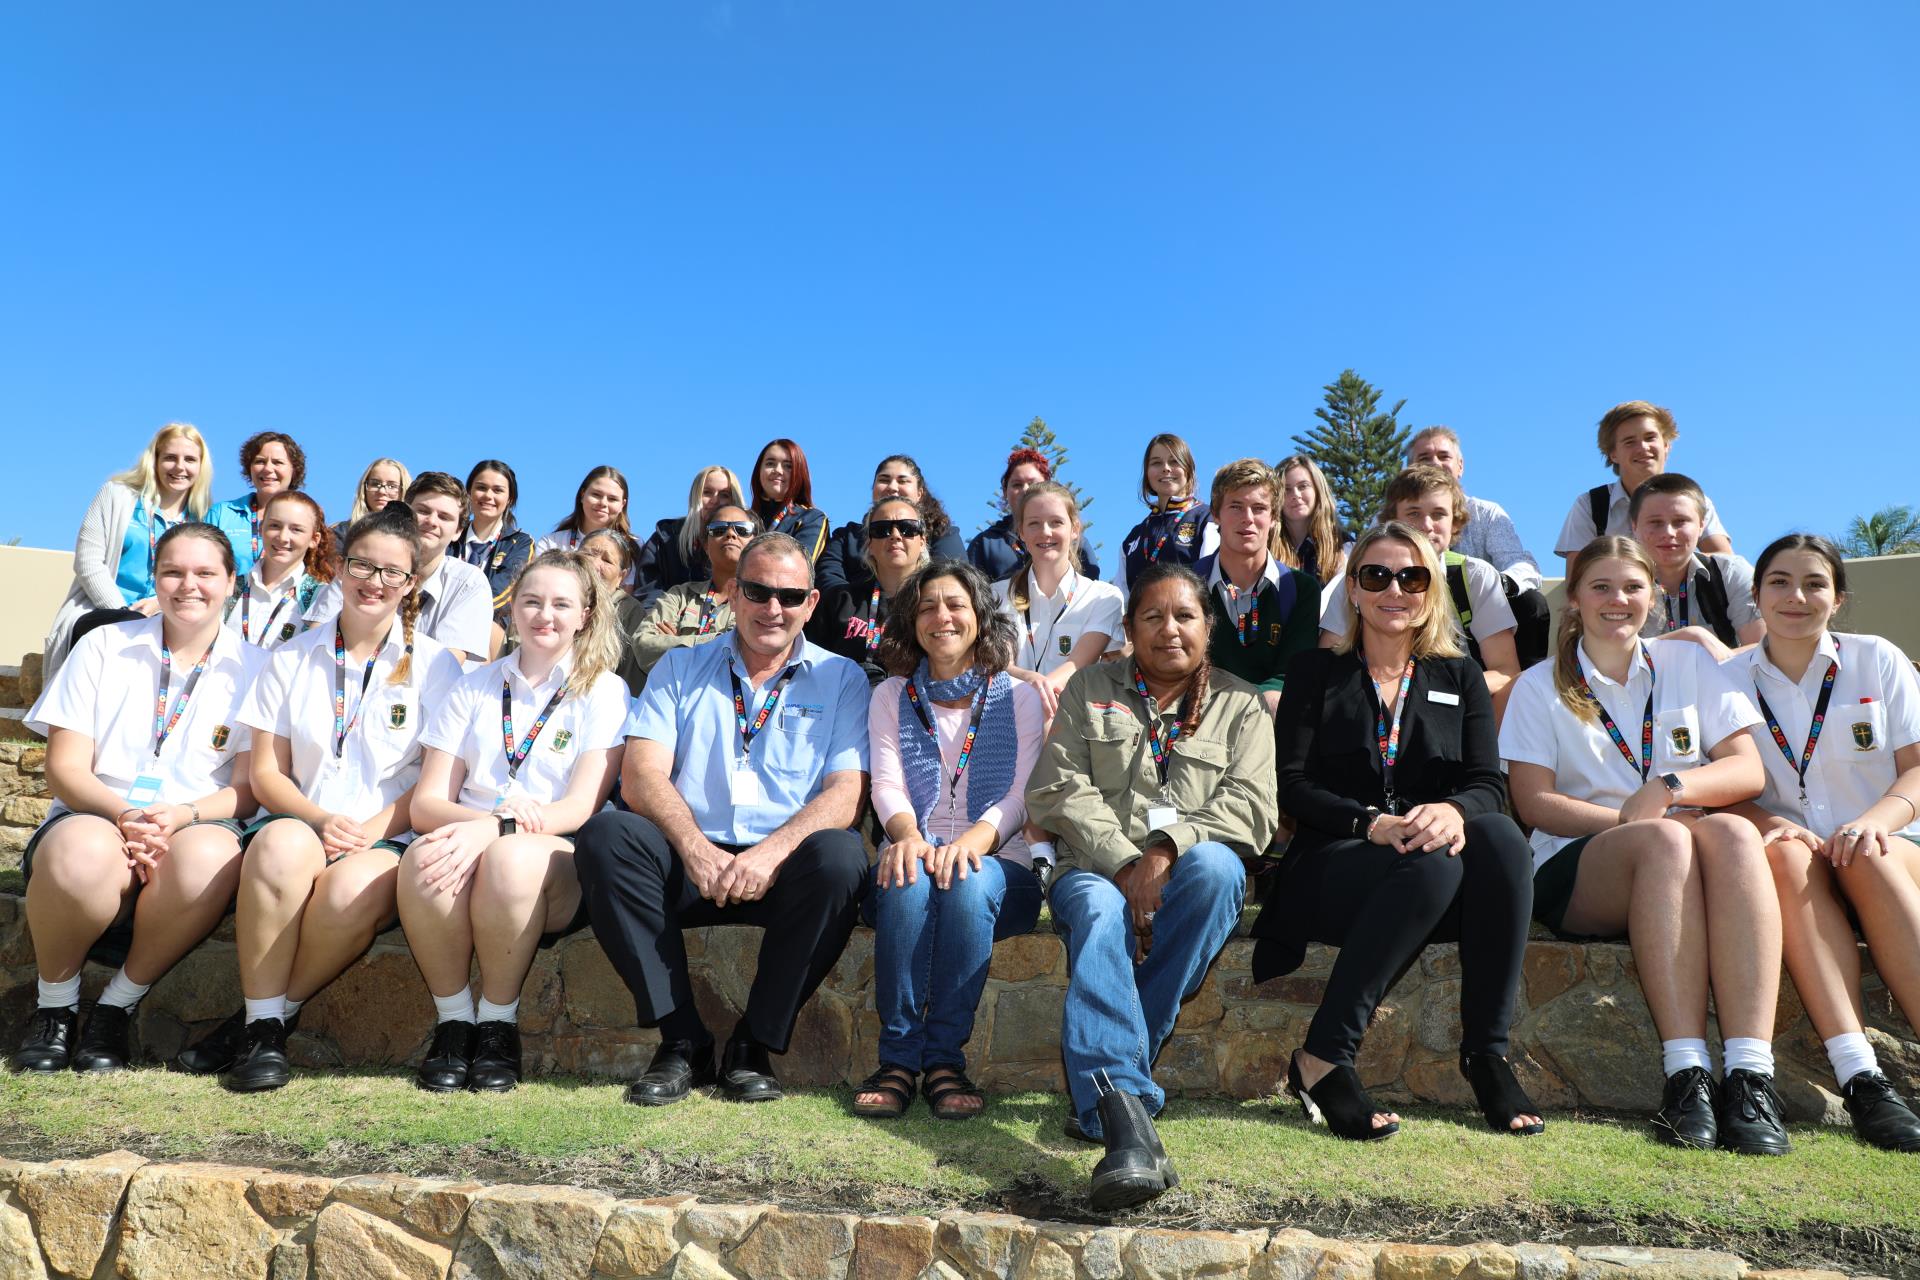 Event industry sponsors John Gooch from Shine Aviation and Pia Boschetti from Latitude Gallery made it possible for Tourism students from Geraldton Senior College, Central West Tafe and Nagle Catholic College to attend the event